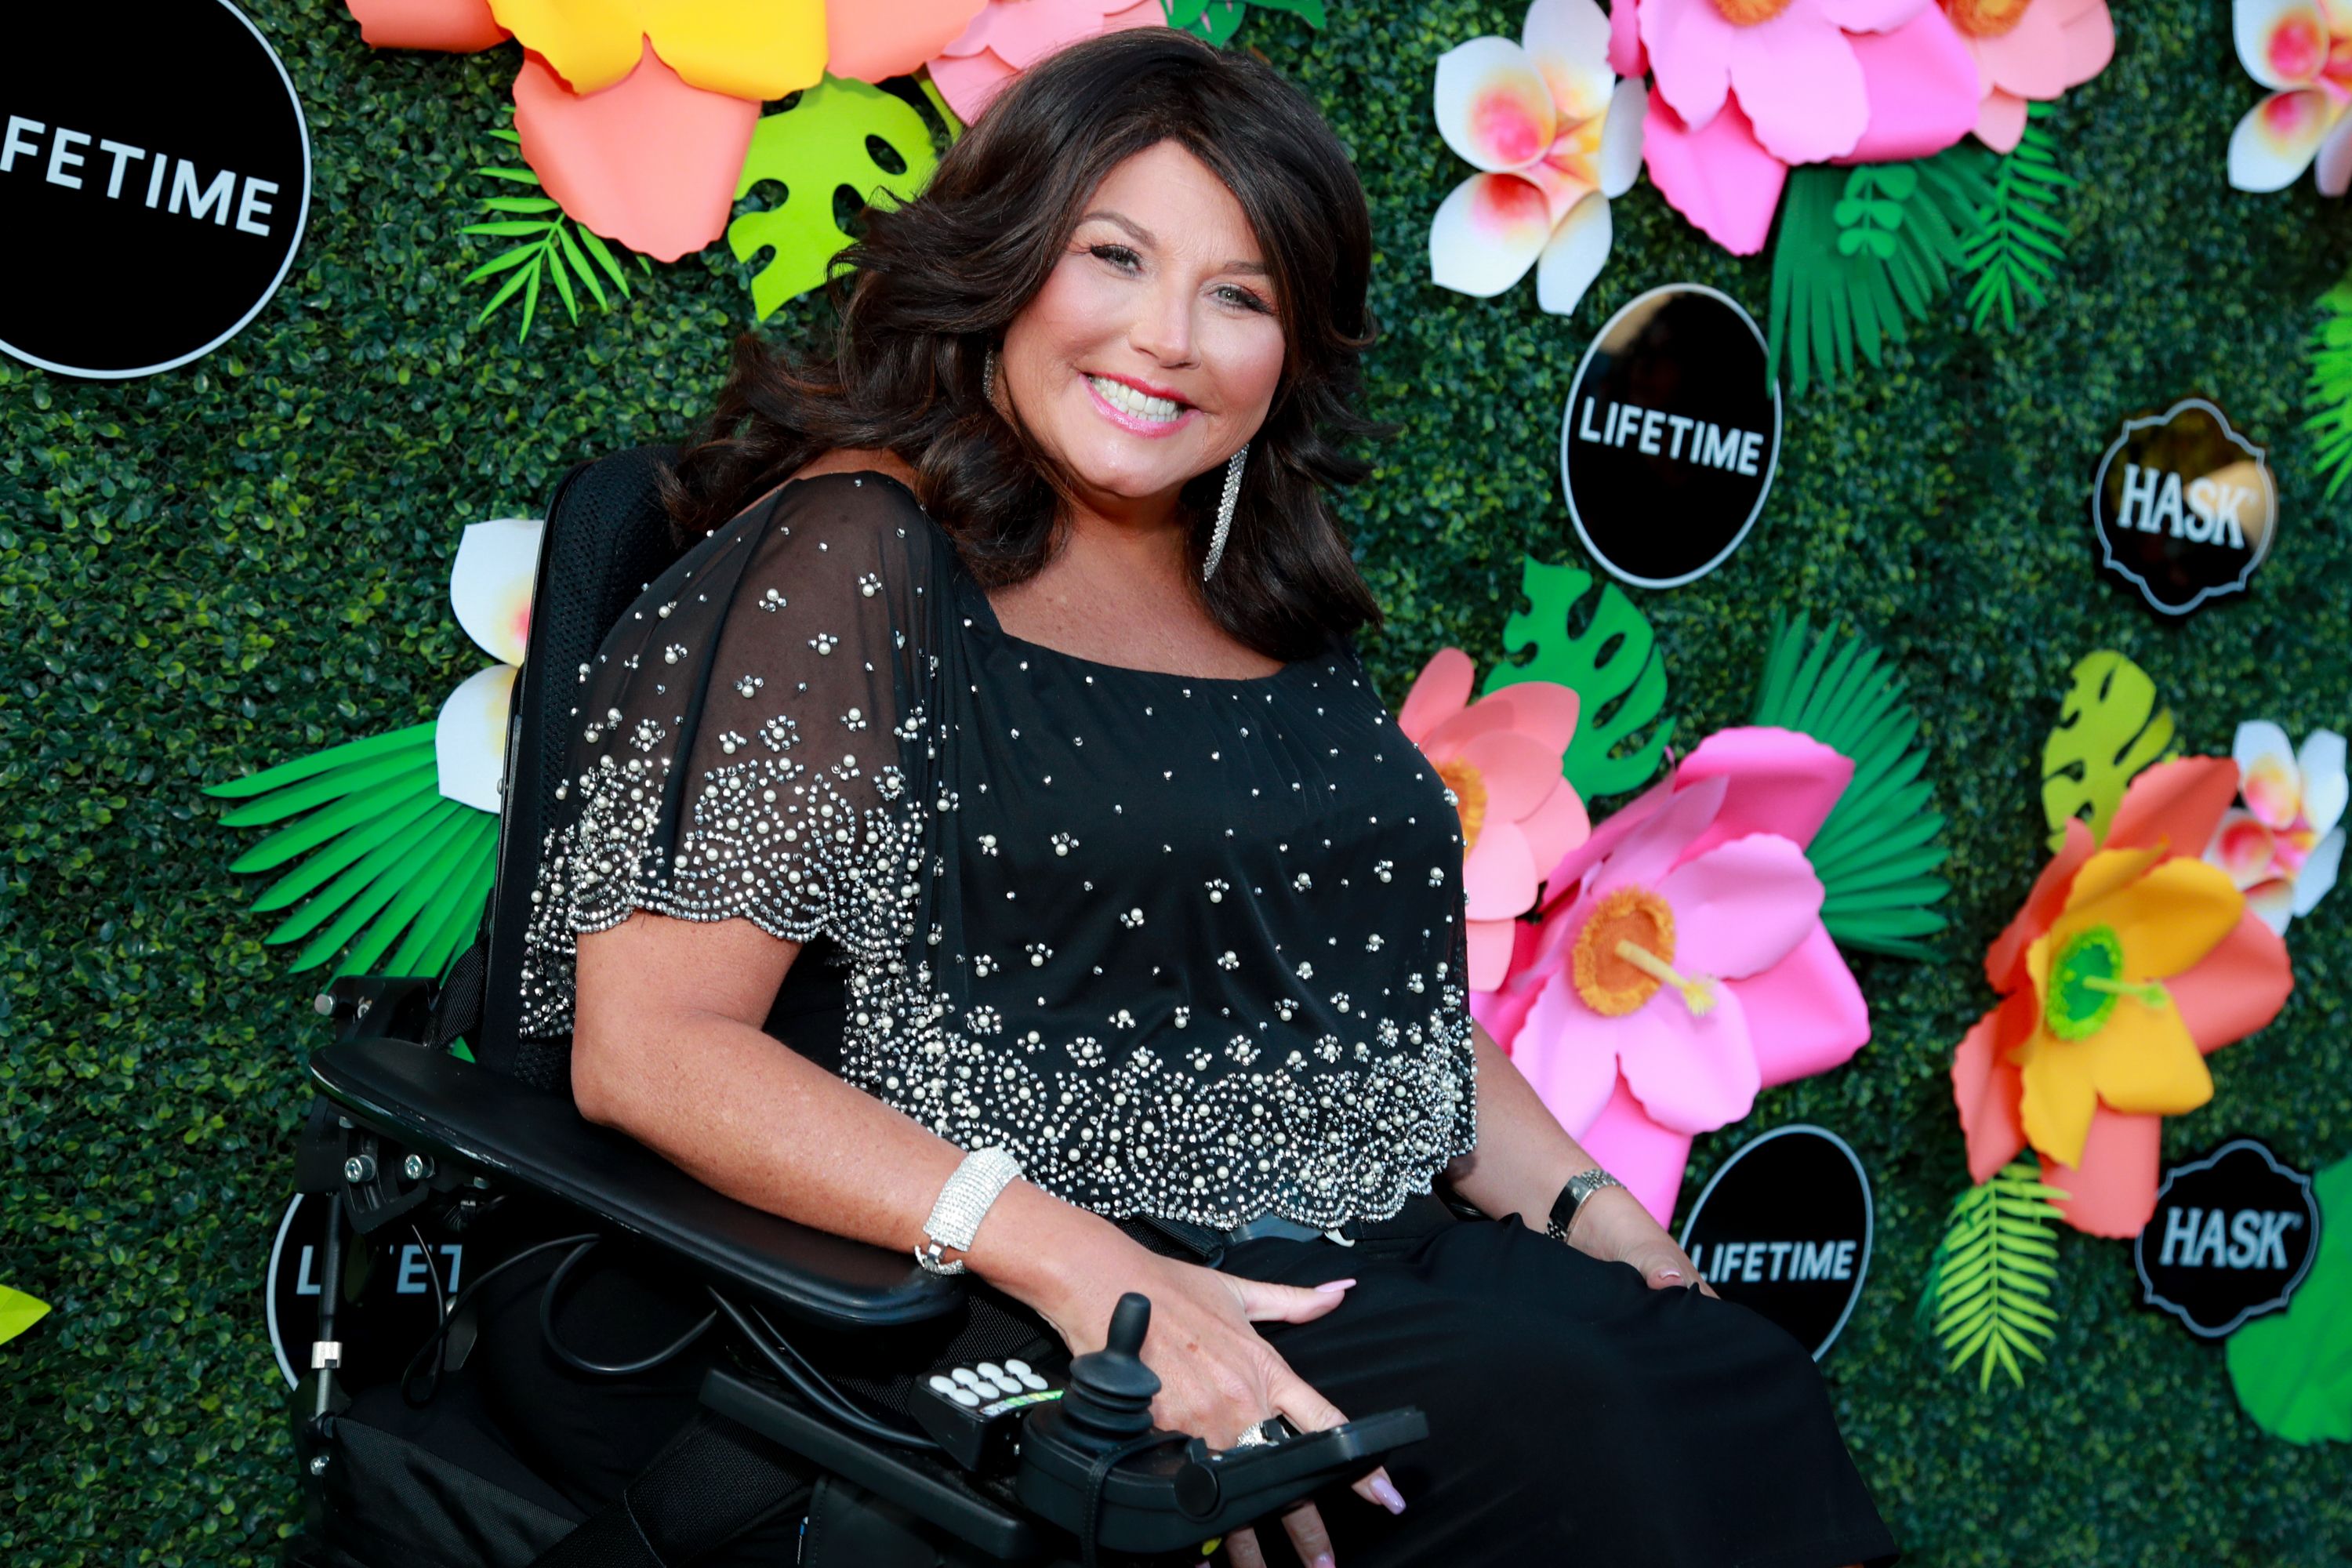 Where Is Abby Lee Miller Now? Update Since 'Dance Moms